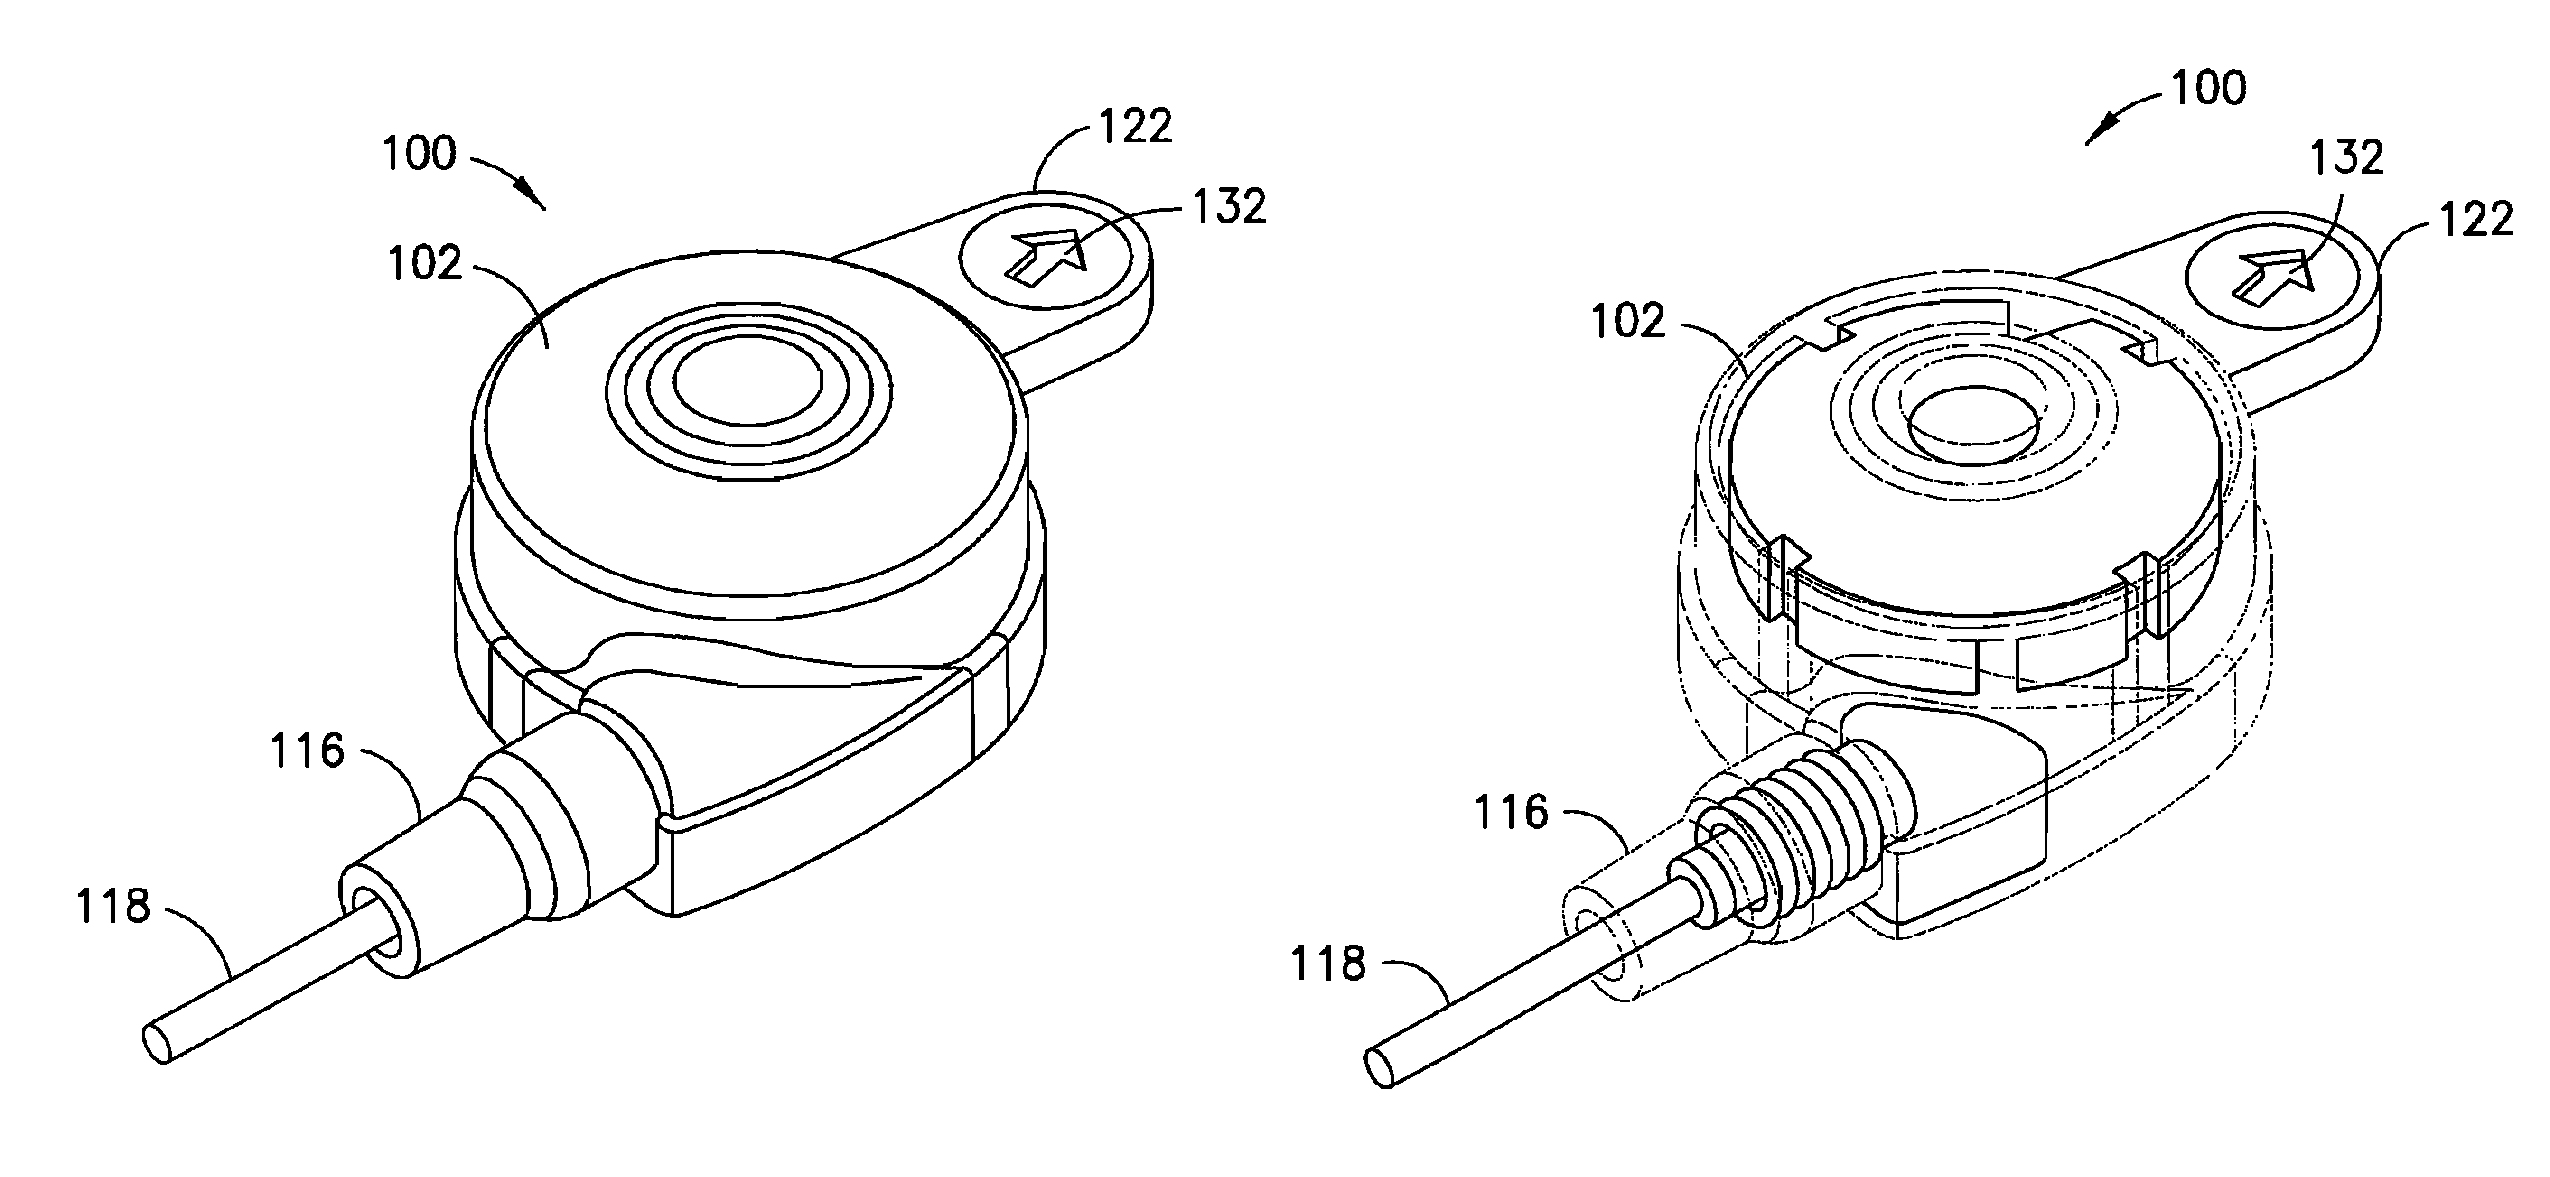 Integrated spring-activated ballistic insertion for drug infusion device